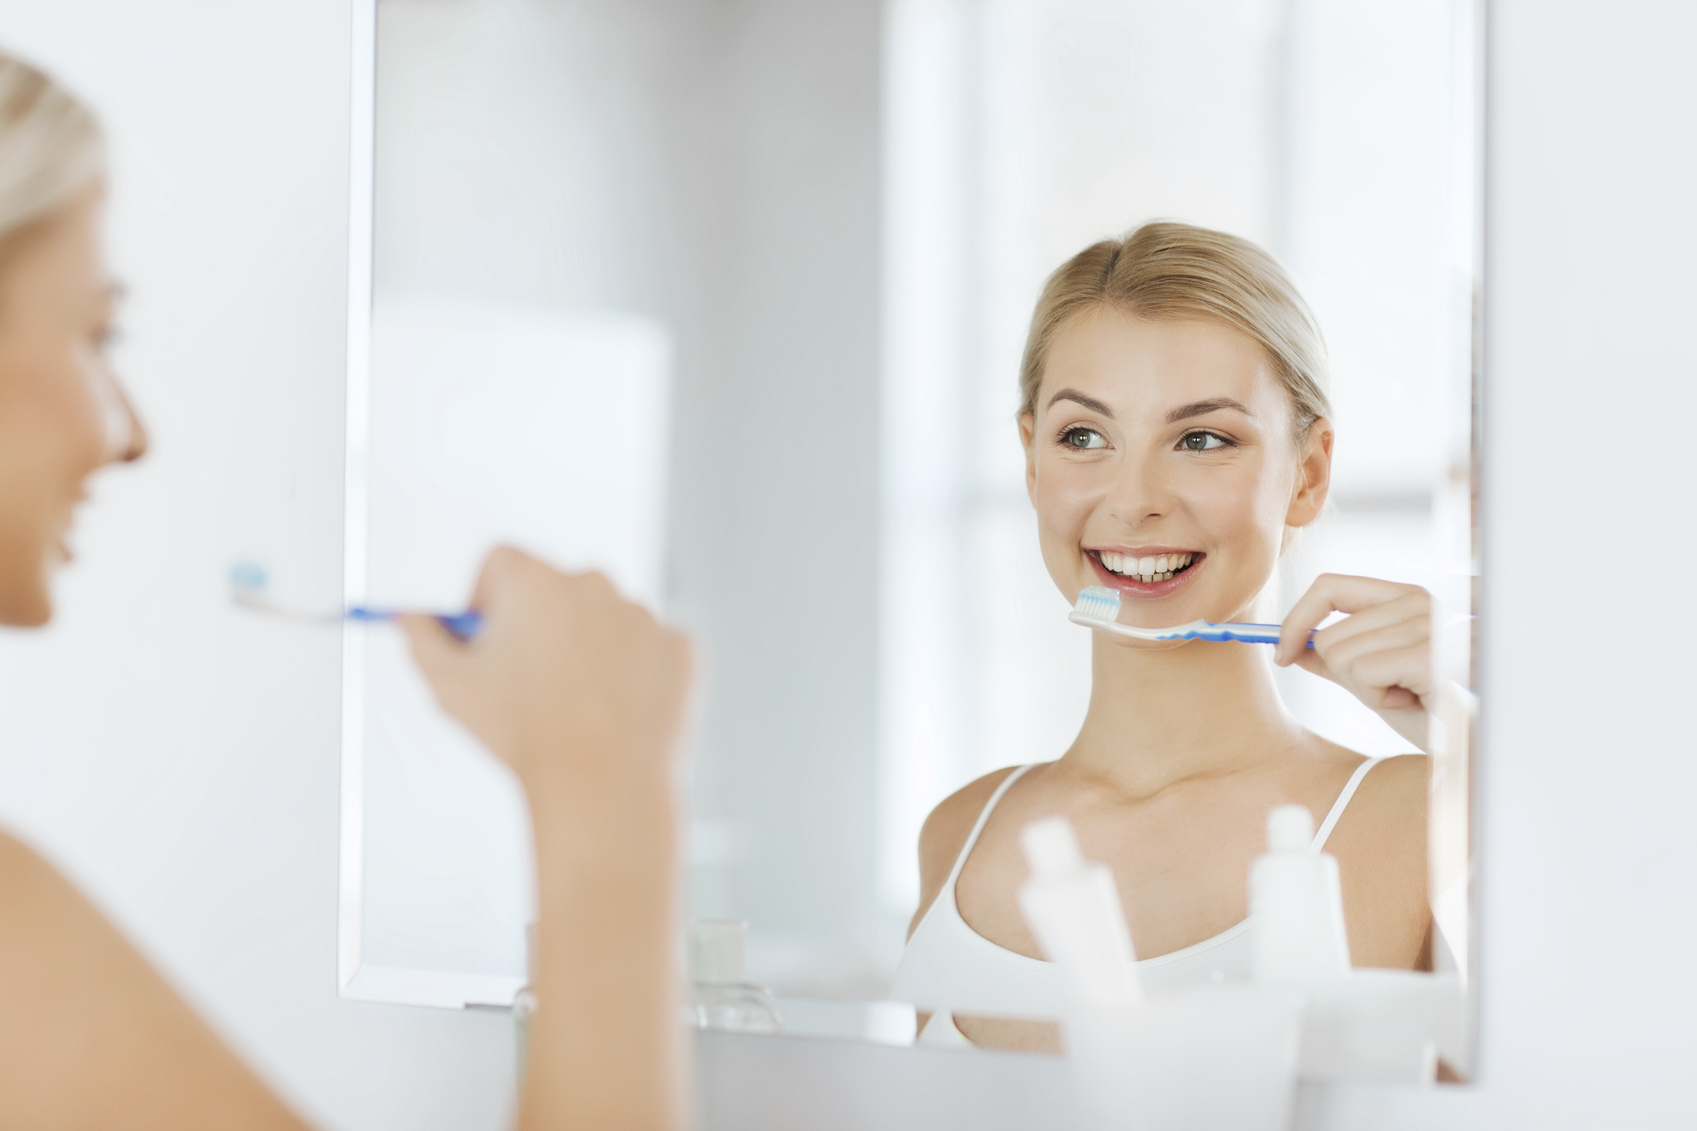 health care, dental hygiene, people and beauty concept - smiling young woman with toothbrush cleaning teeth and looking to mirror at home bathroom